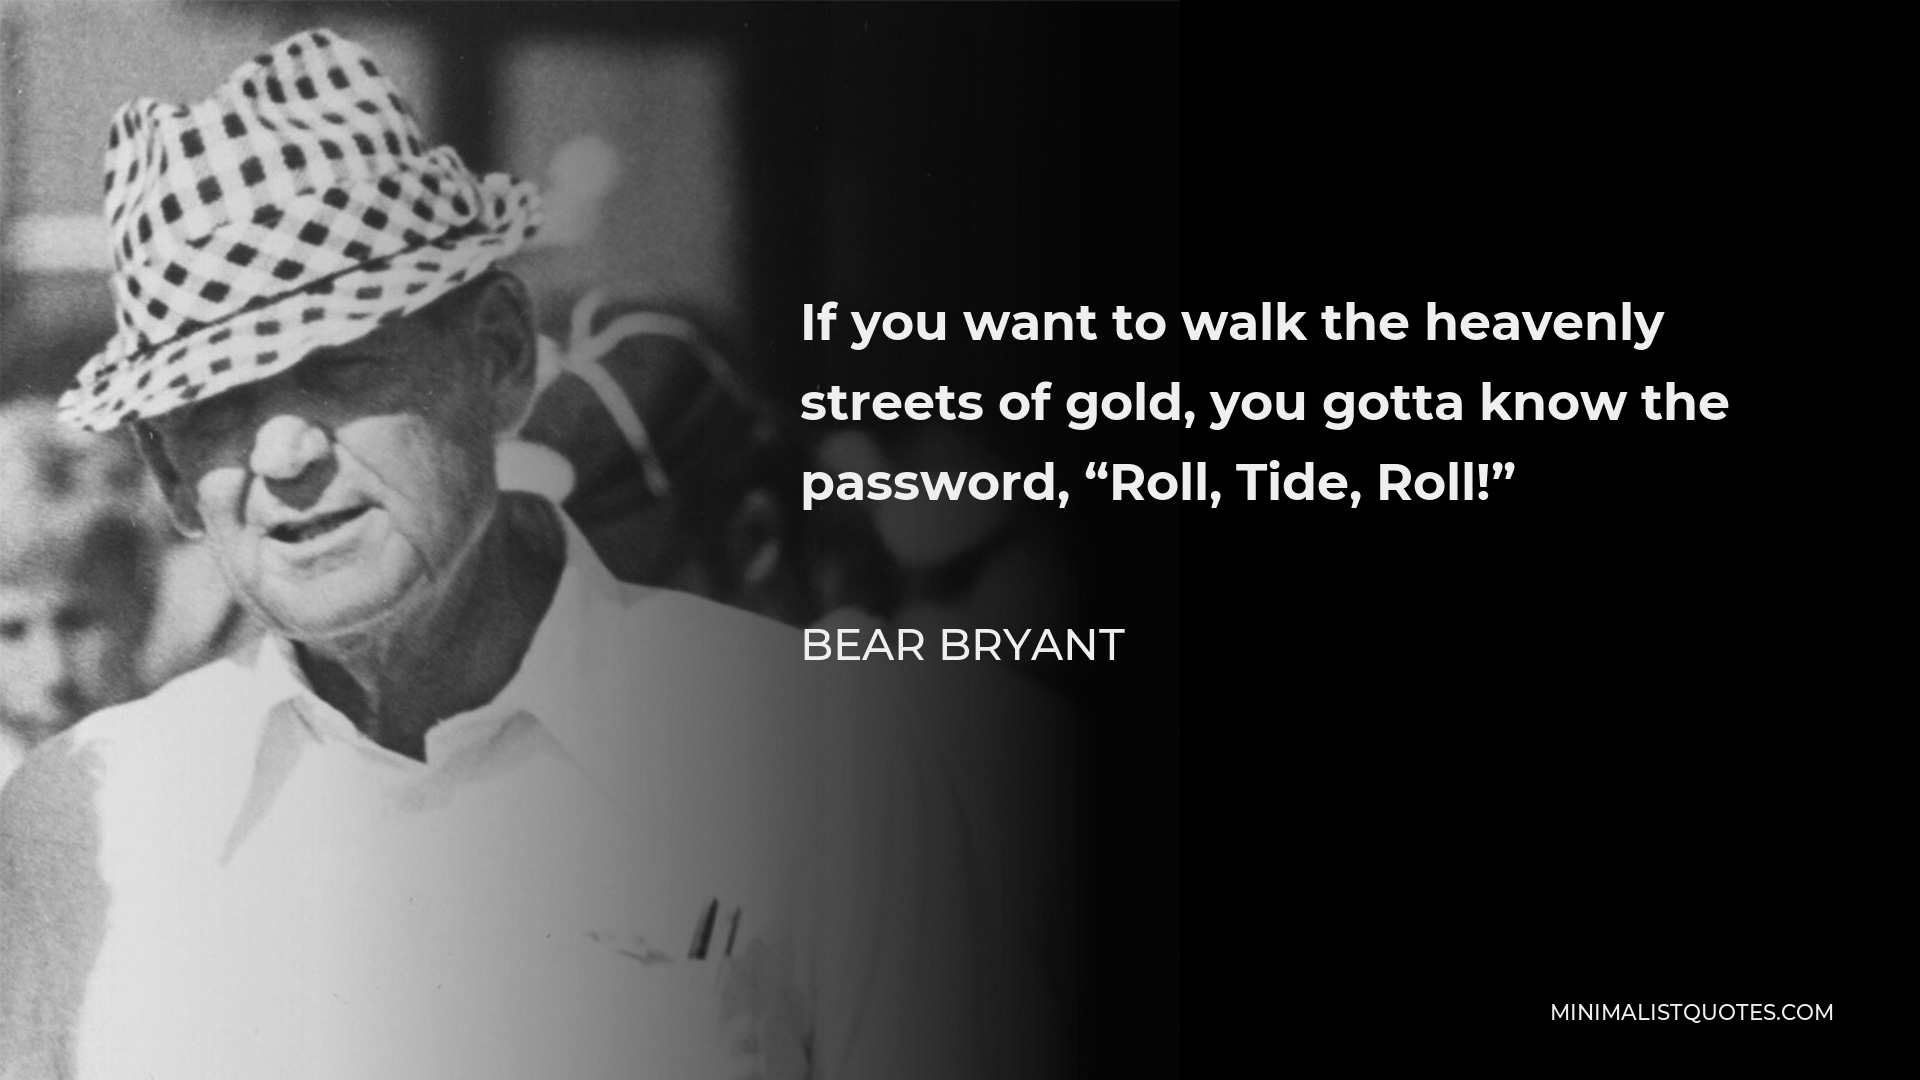 Bear Bryant Quote - If you want to walk the heavenly streets of gold, you gotta know the password, “Roll, Tide, Roll!”